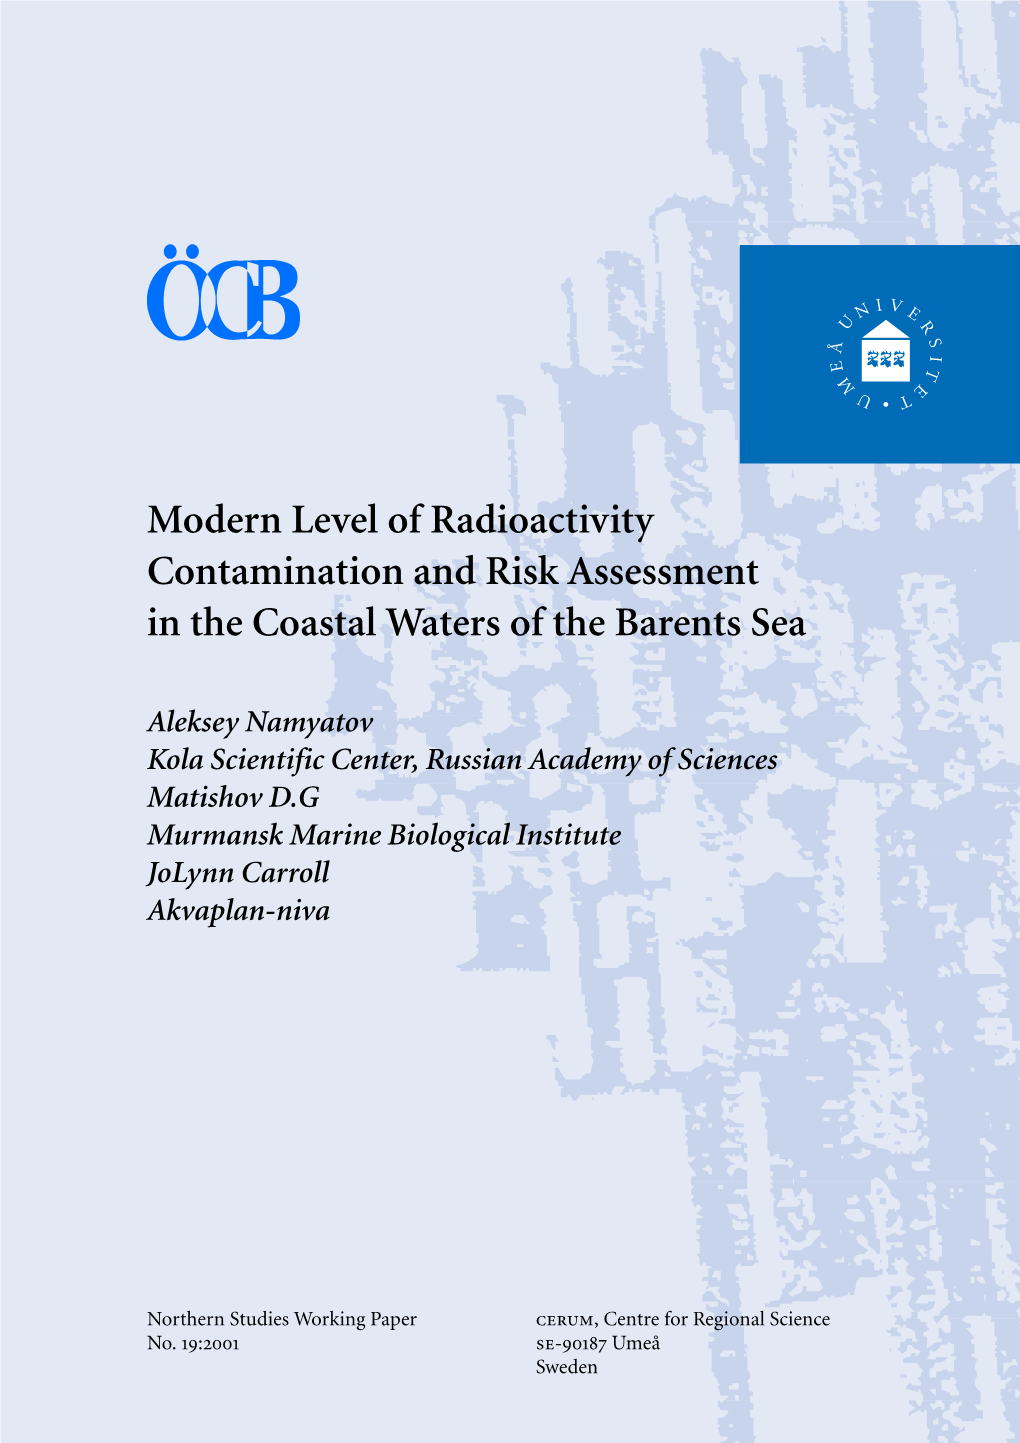 Modern Level of Radioactivity Contamination and Risk Assessment in the Coastal Waters of the Barents Sea